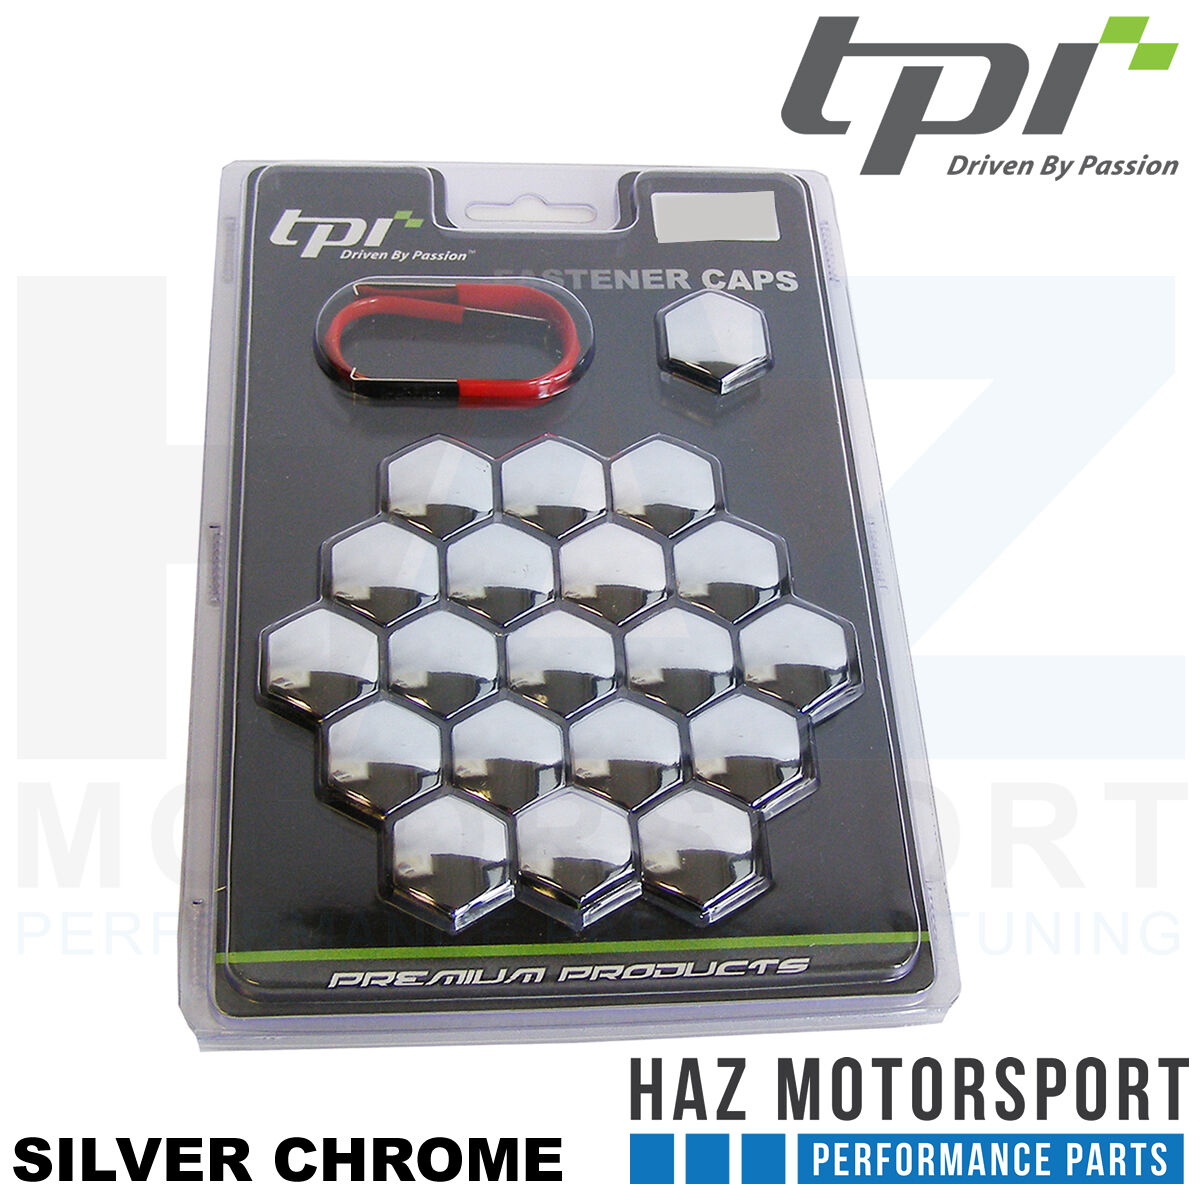 TPi Original 20 x Hex Alloy Wheel Bolt/Nut Covers And Removal Tool